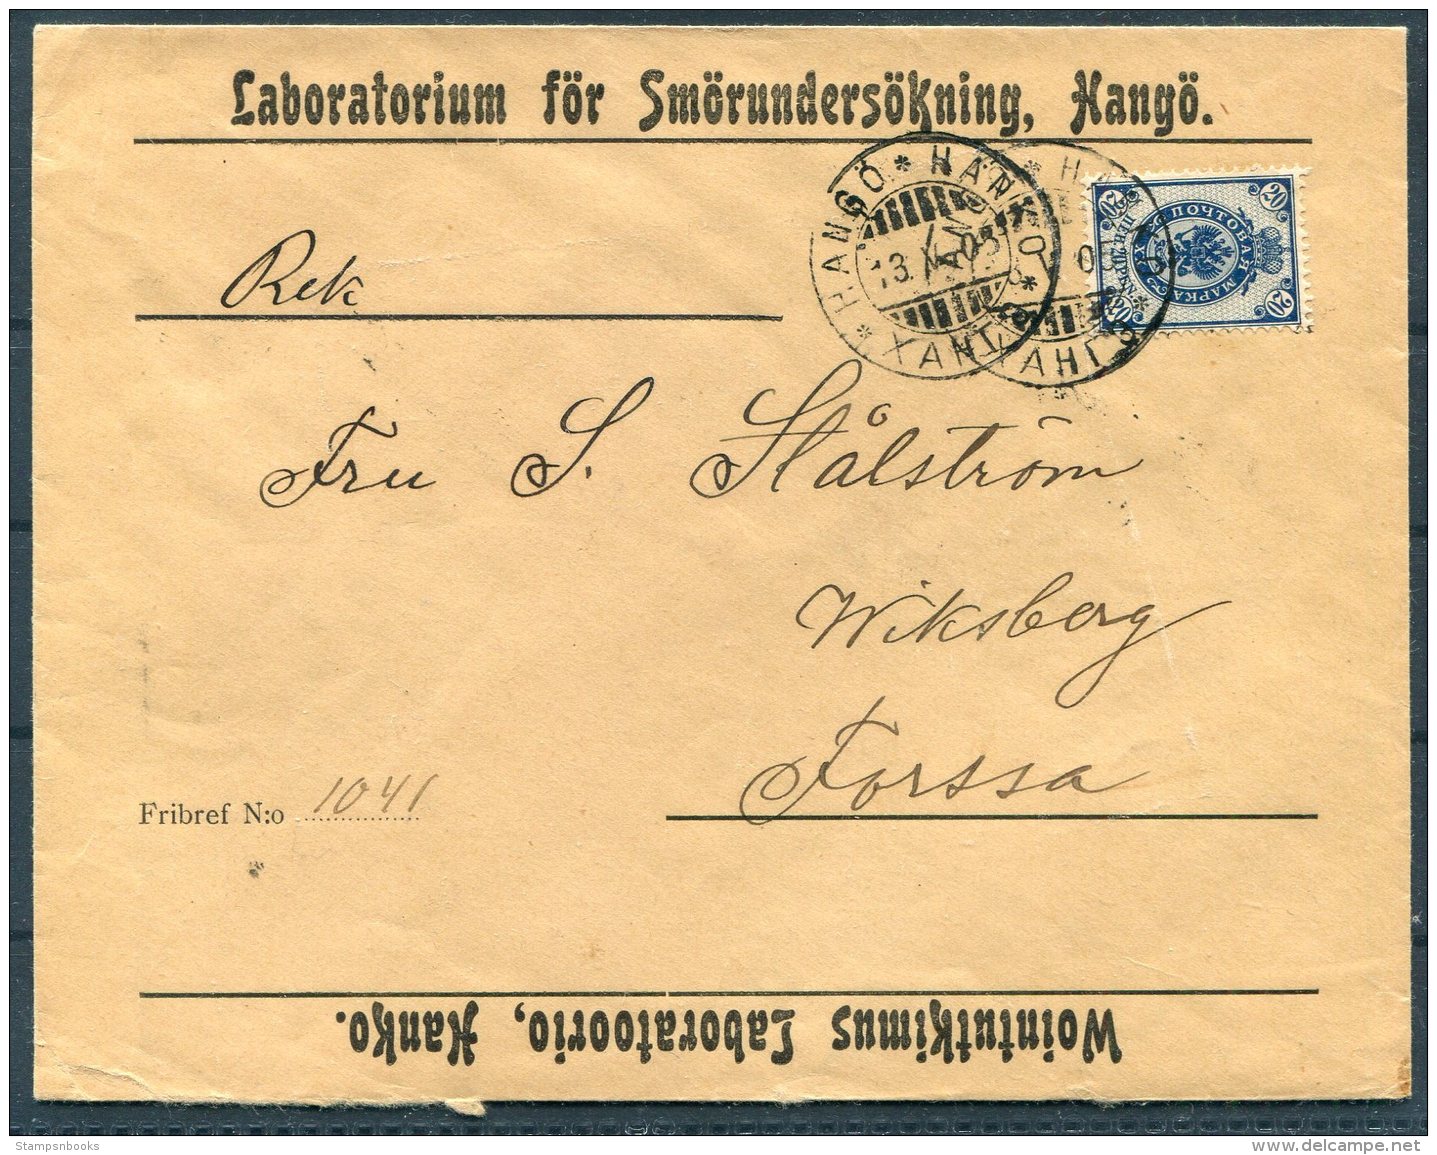 1905 Finland Research Laboratory Hango Cover - Forssa. Butter Testing - Aland